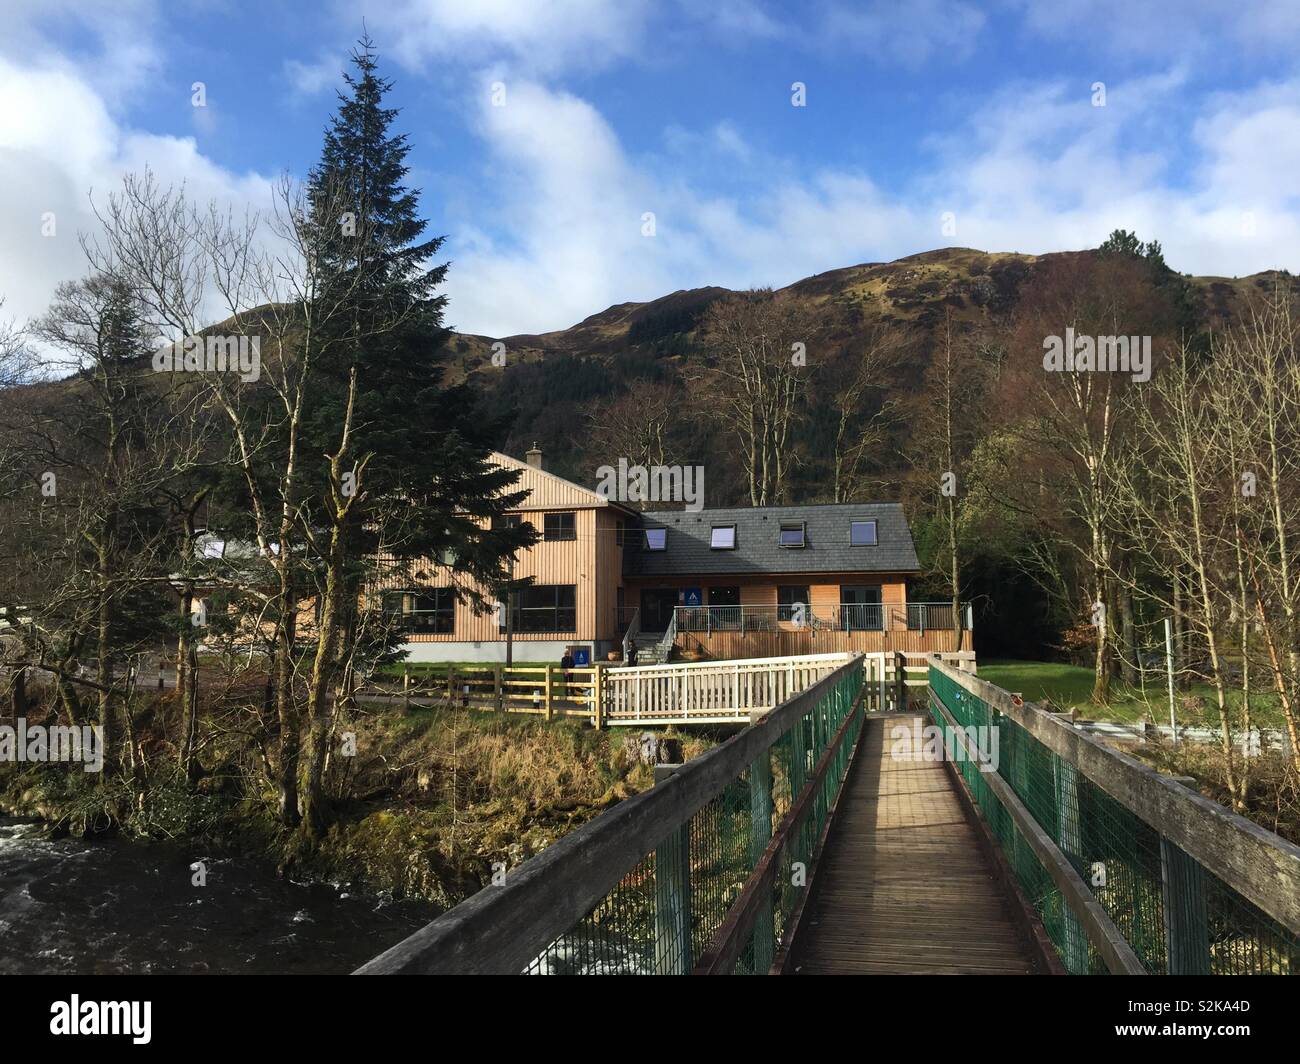 Youth Hostel accommodation building with mountain landscape and bridge, Glen Nevis, Fort William, Scotland Stock Photo